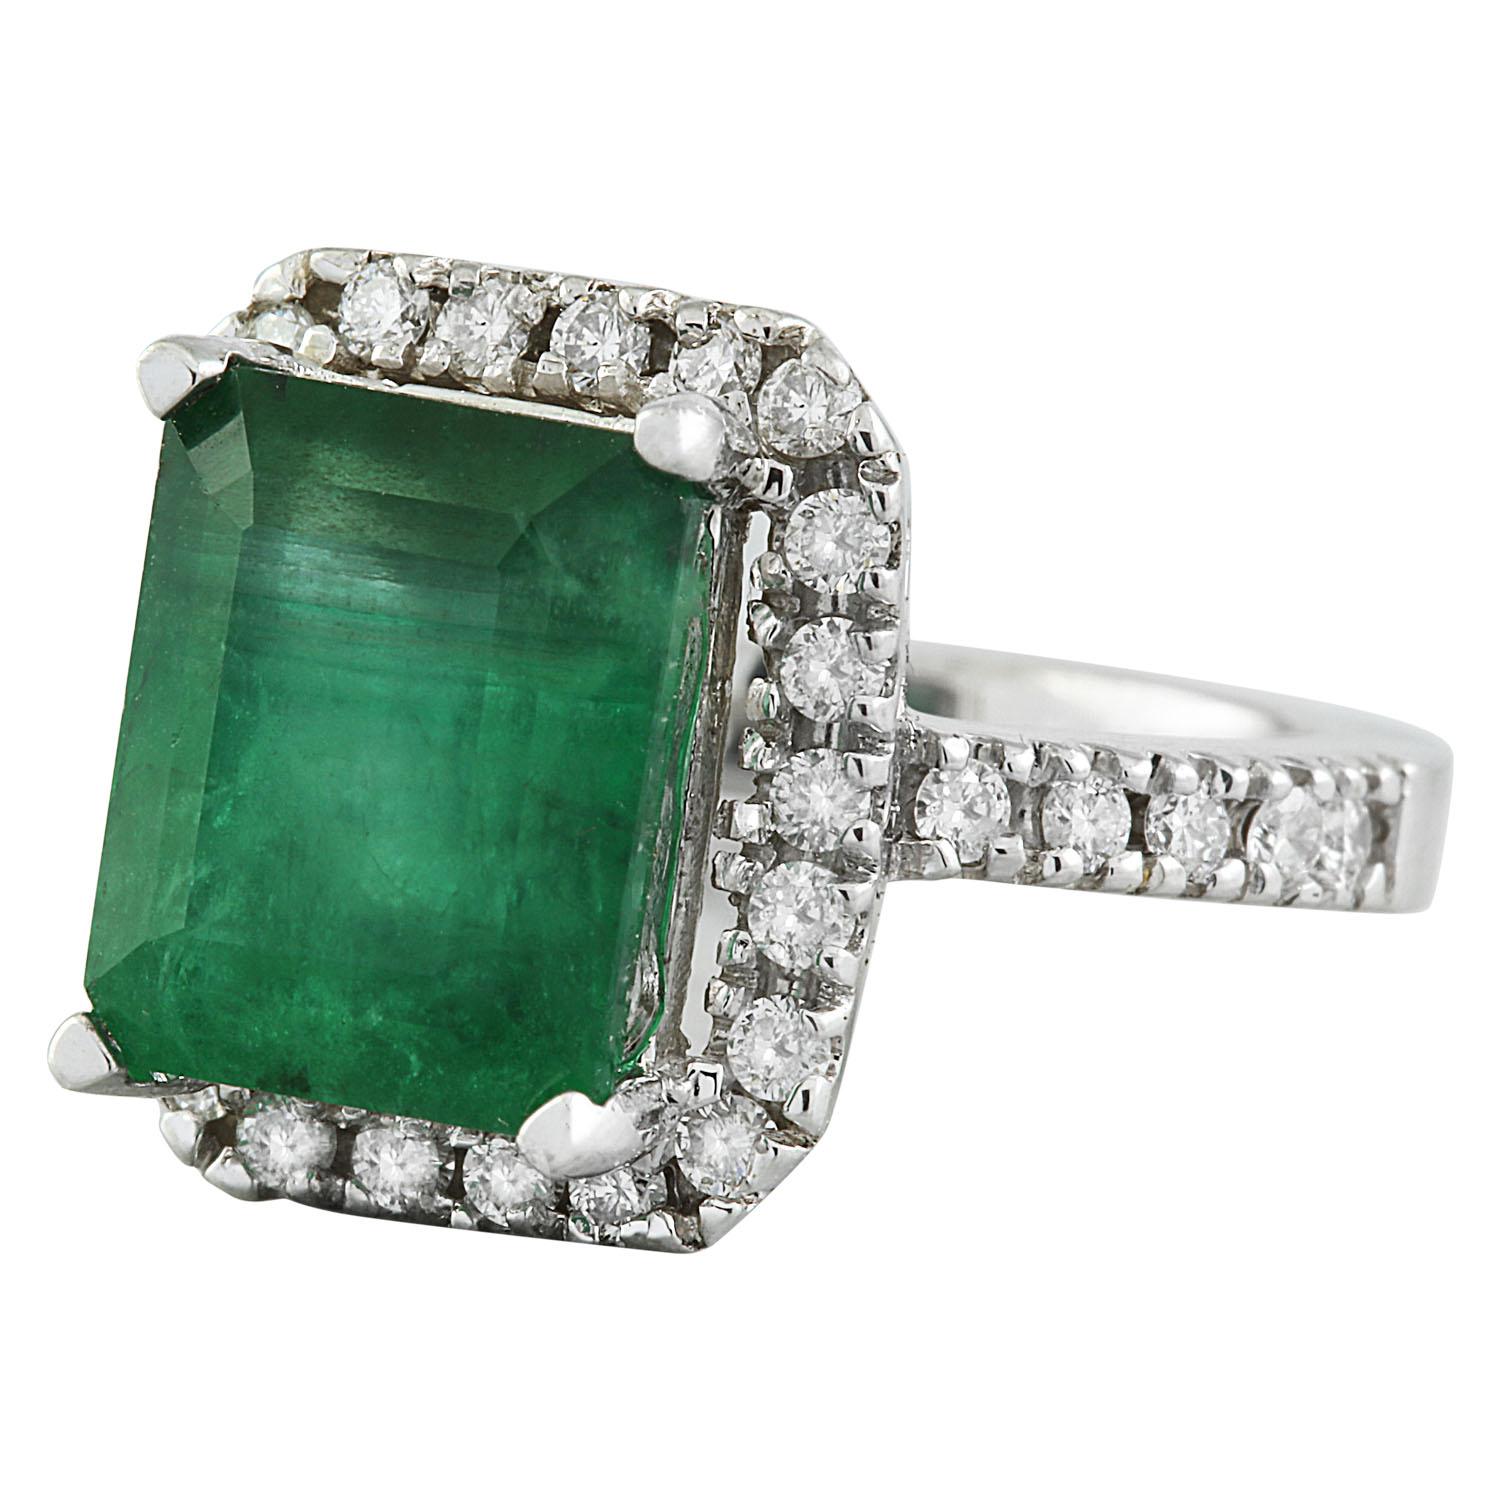 3.60 Carat Natural Emerald 14 Karat Solid White Gold Diamond Ring
Stamped: 14K 
Total Ring Weight: 6.5 Grams
Emerald Weight 3.00 Carat (10.00x8.00 Millimeters)
Diamond Weight: 0.60 carat (F-G Color, VS2-SI1 Clarity )
Quantity: 32
Face Measures: